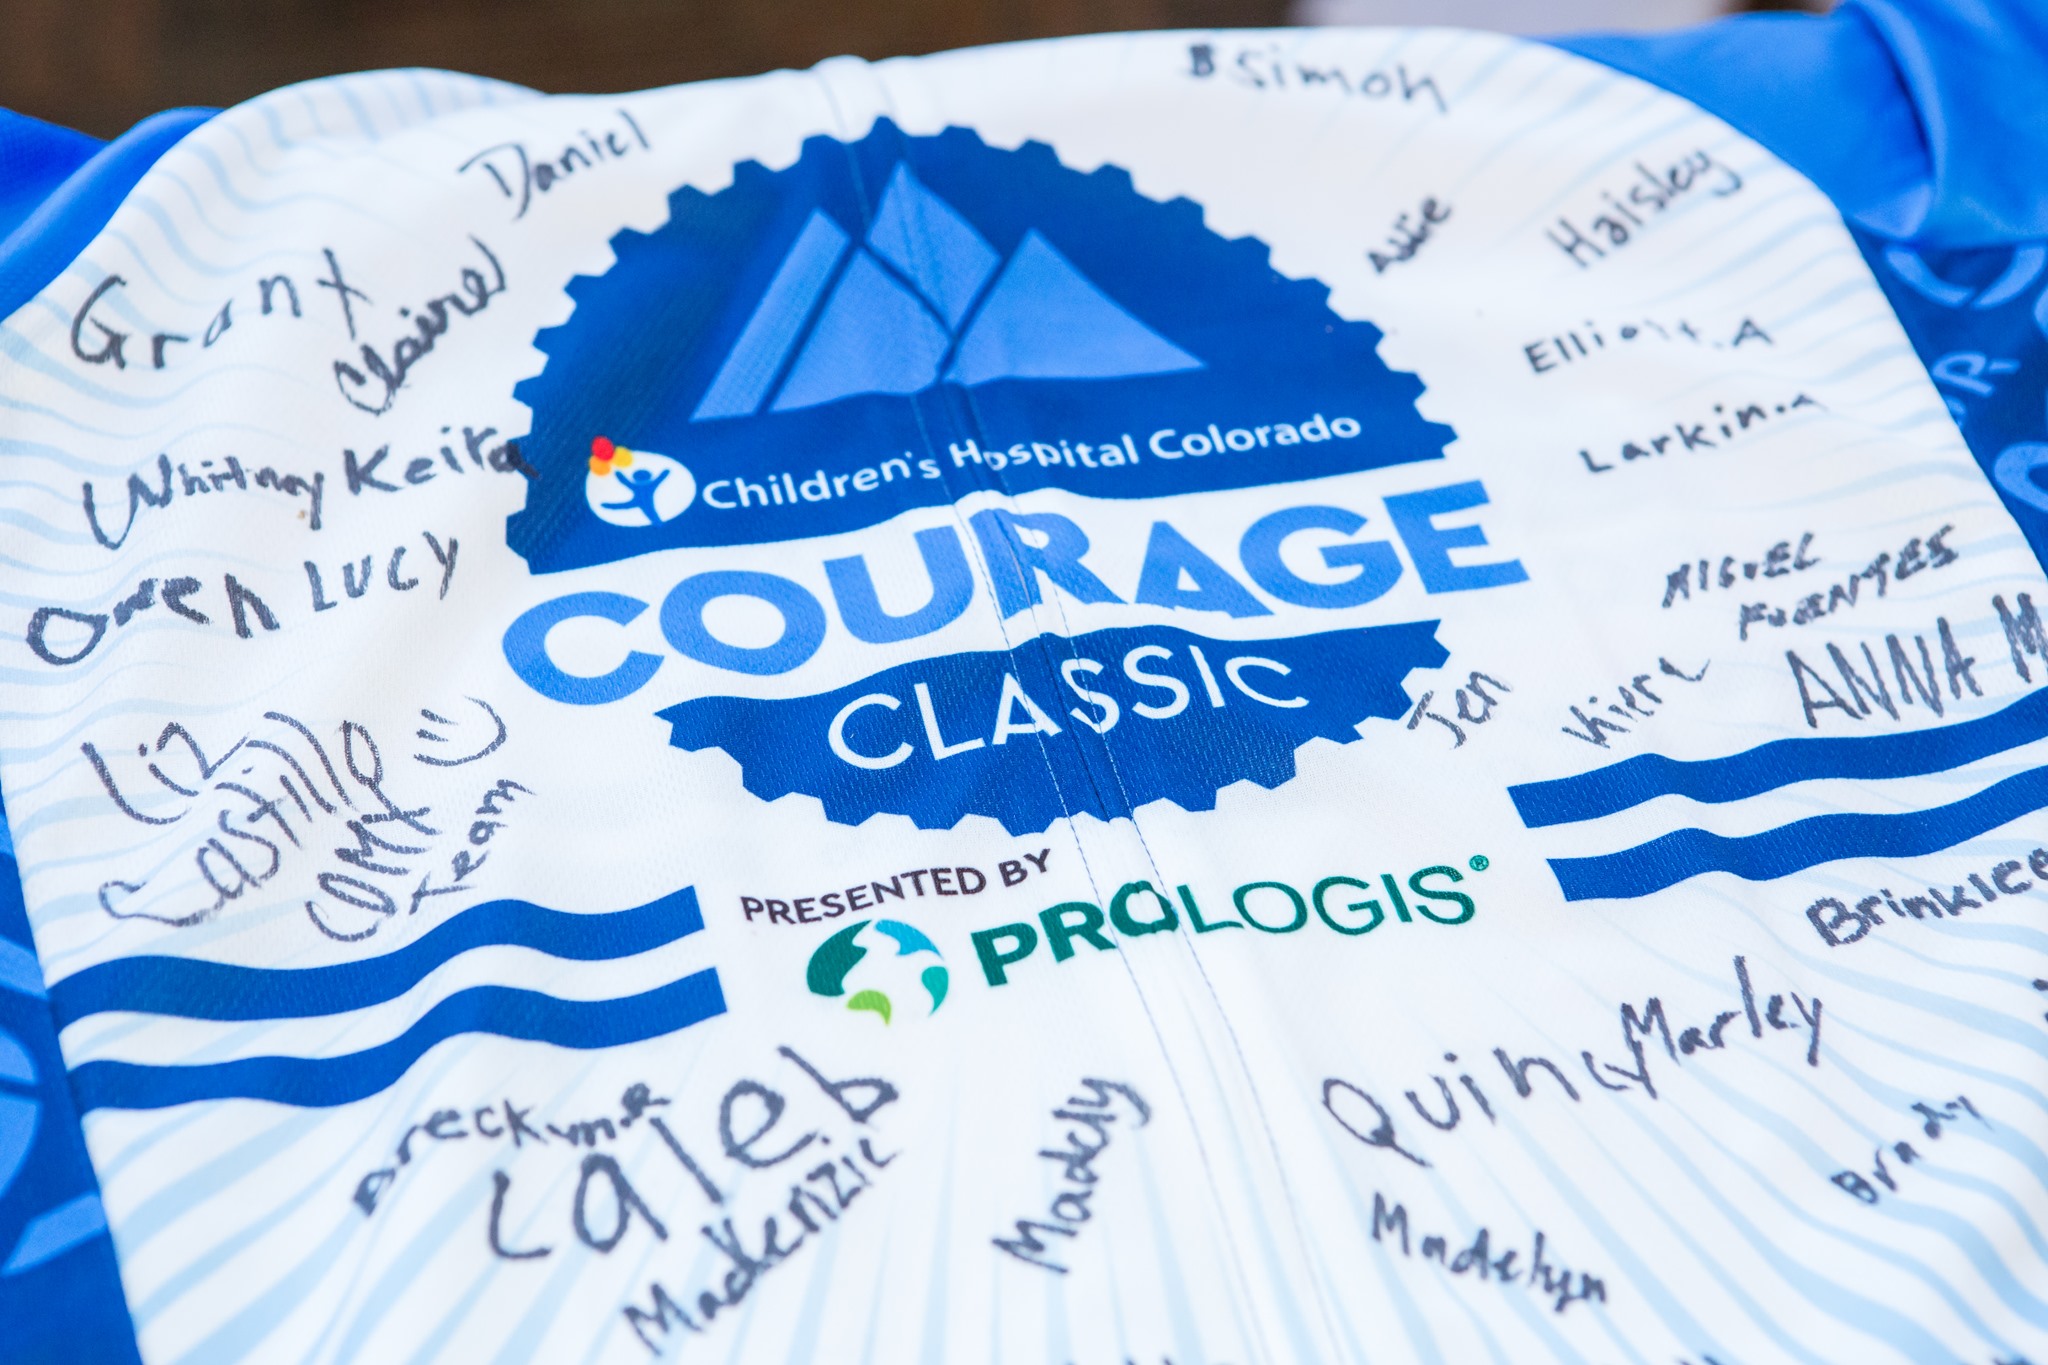 Blue and white Courage Classic jersey crowded with inspiring signatures in ink from supporters